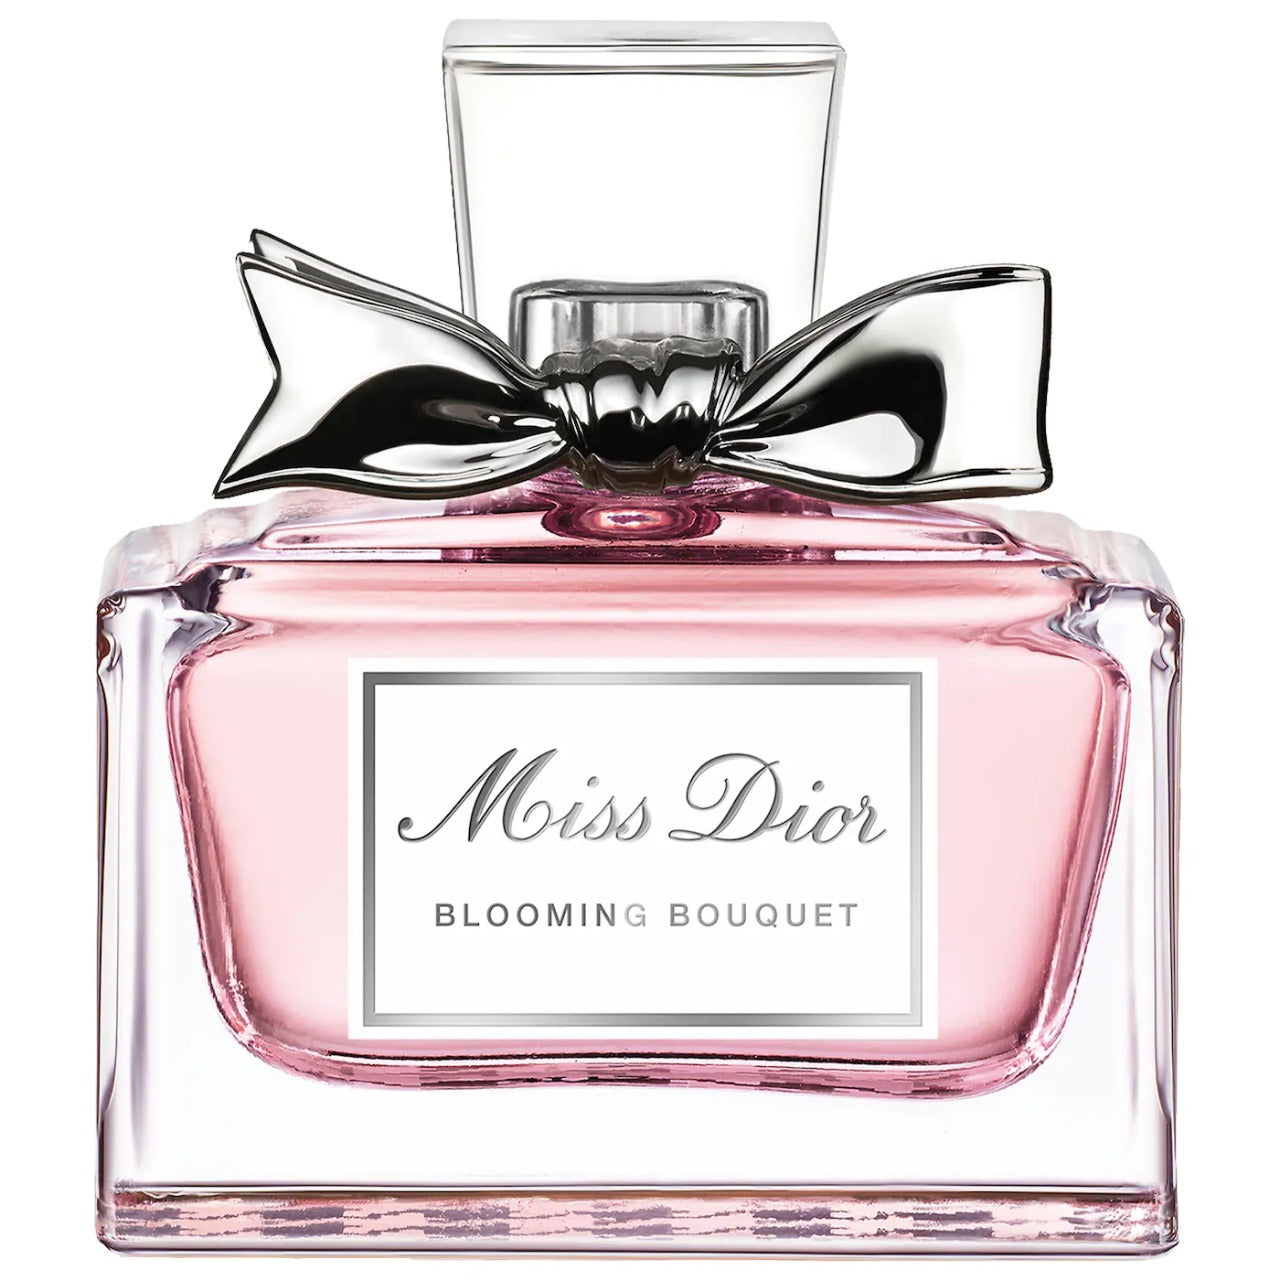 Miss Dior Blooming Bouquet trial size - Dior